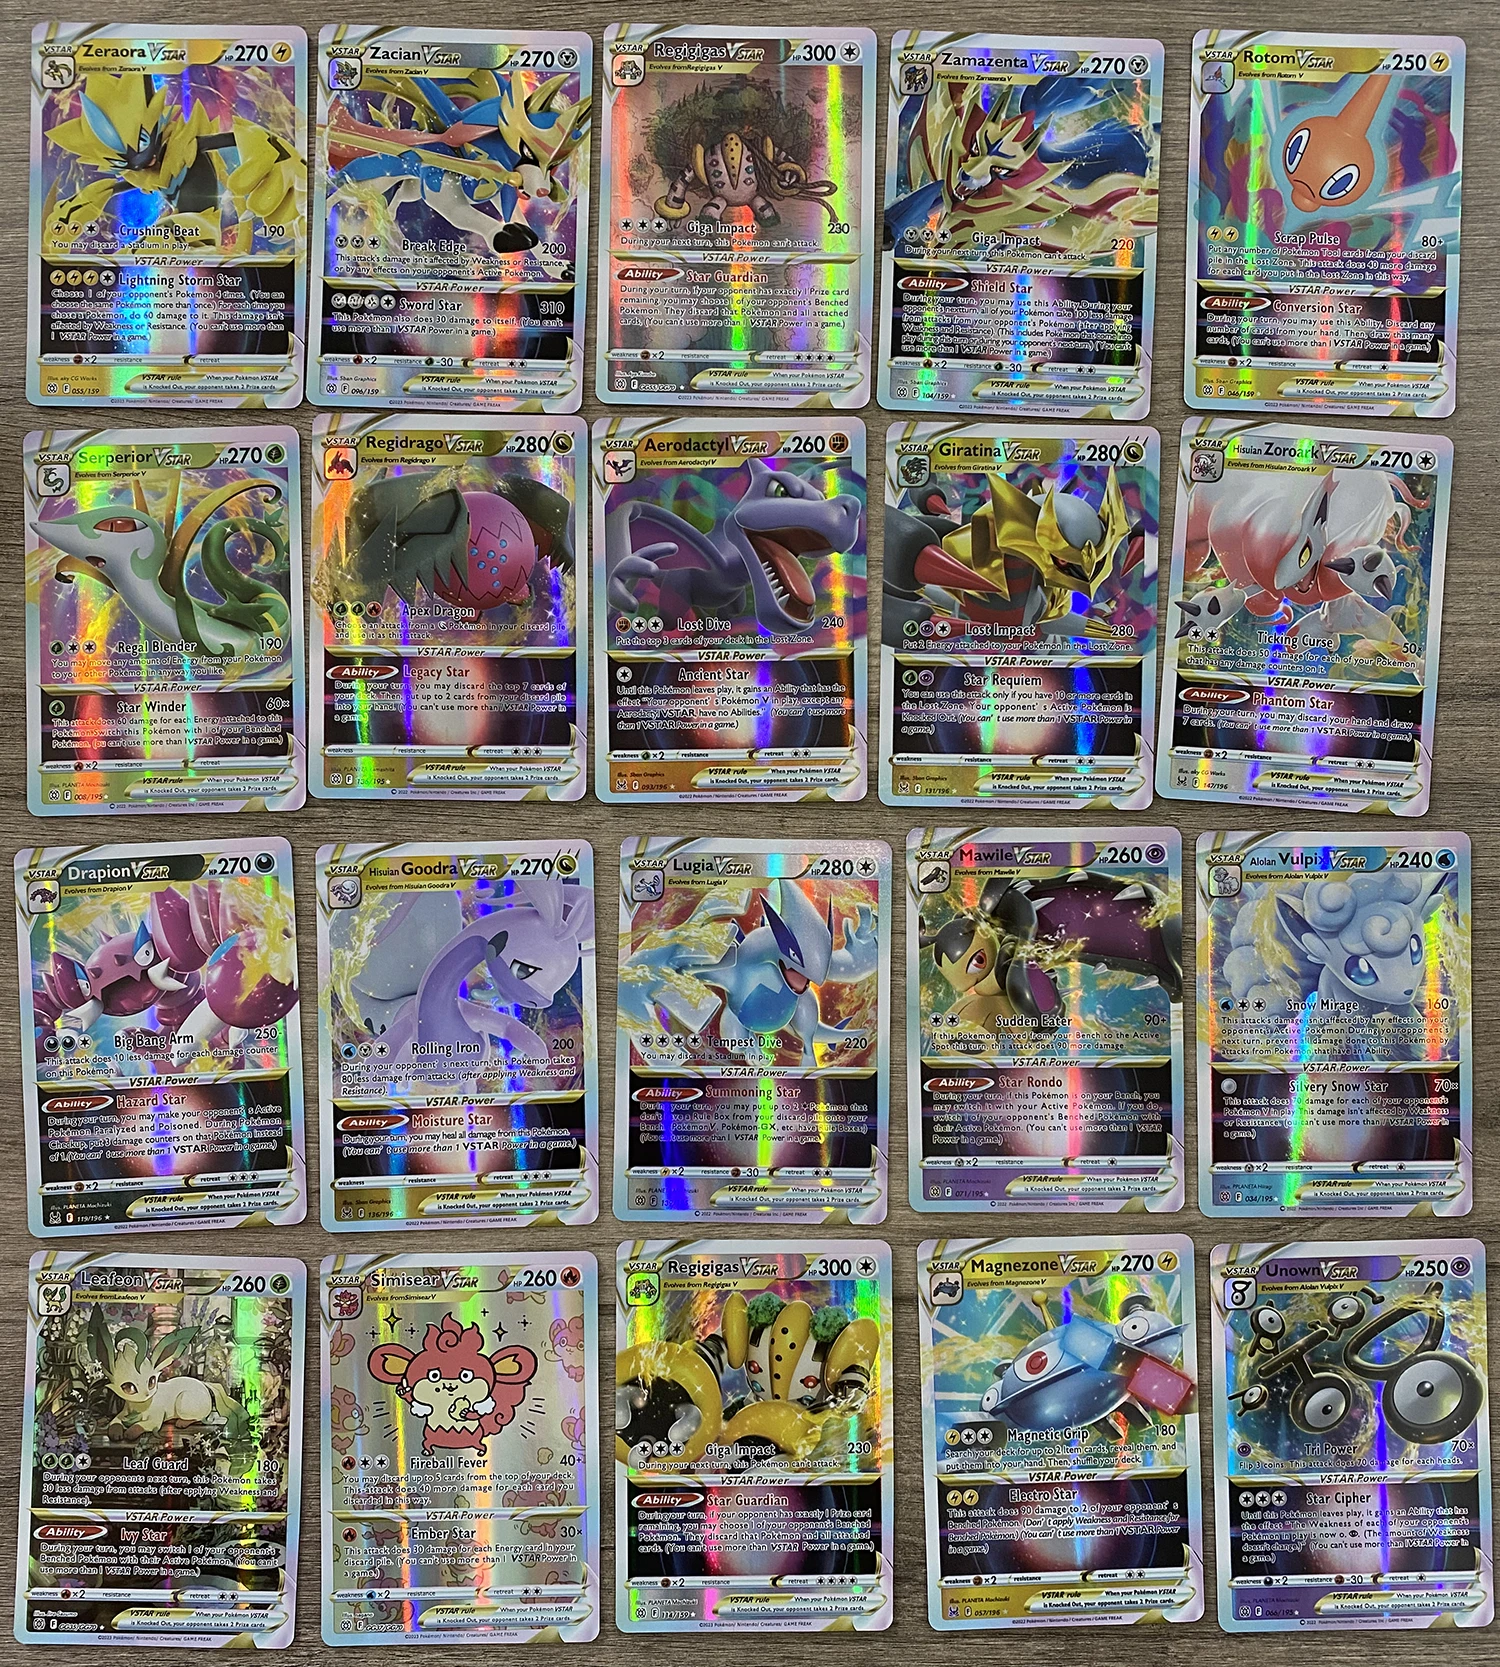 Holographic Pokemon Cards Scarlet Violet New ex Vstar Vmax GX in English  Letter with Rainbow Arceus Shiny Charizard Kids Gift - AliExpress